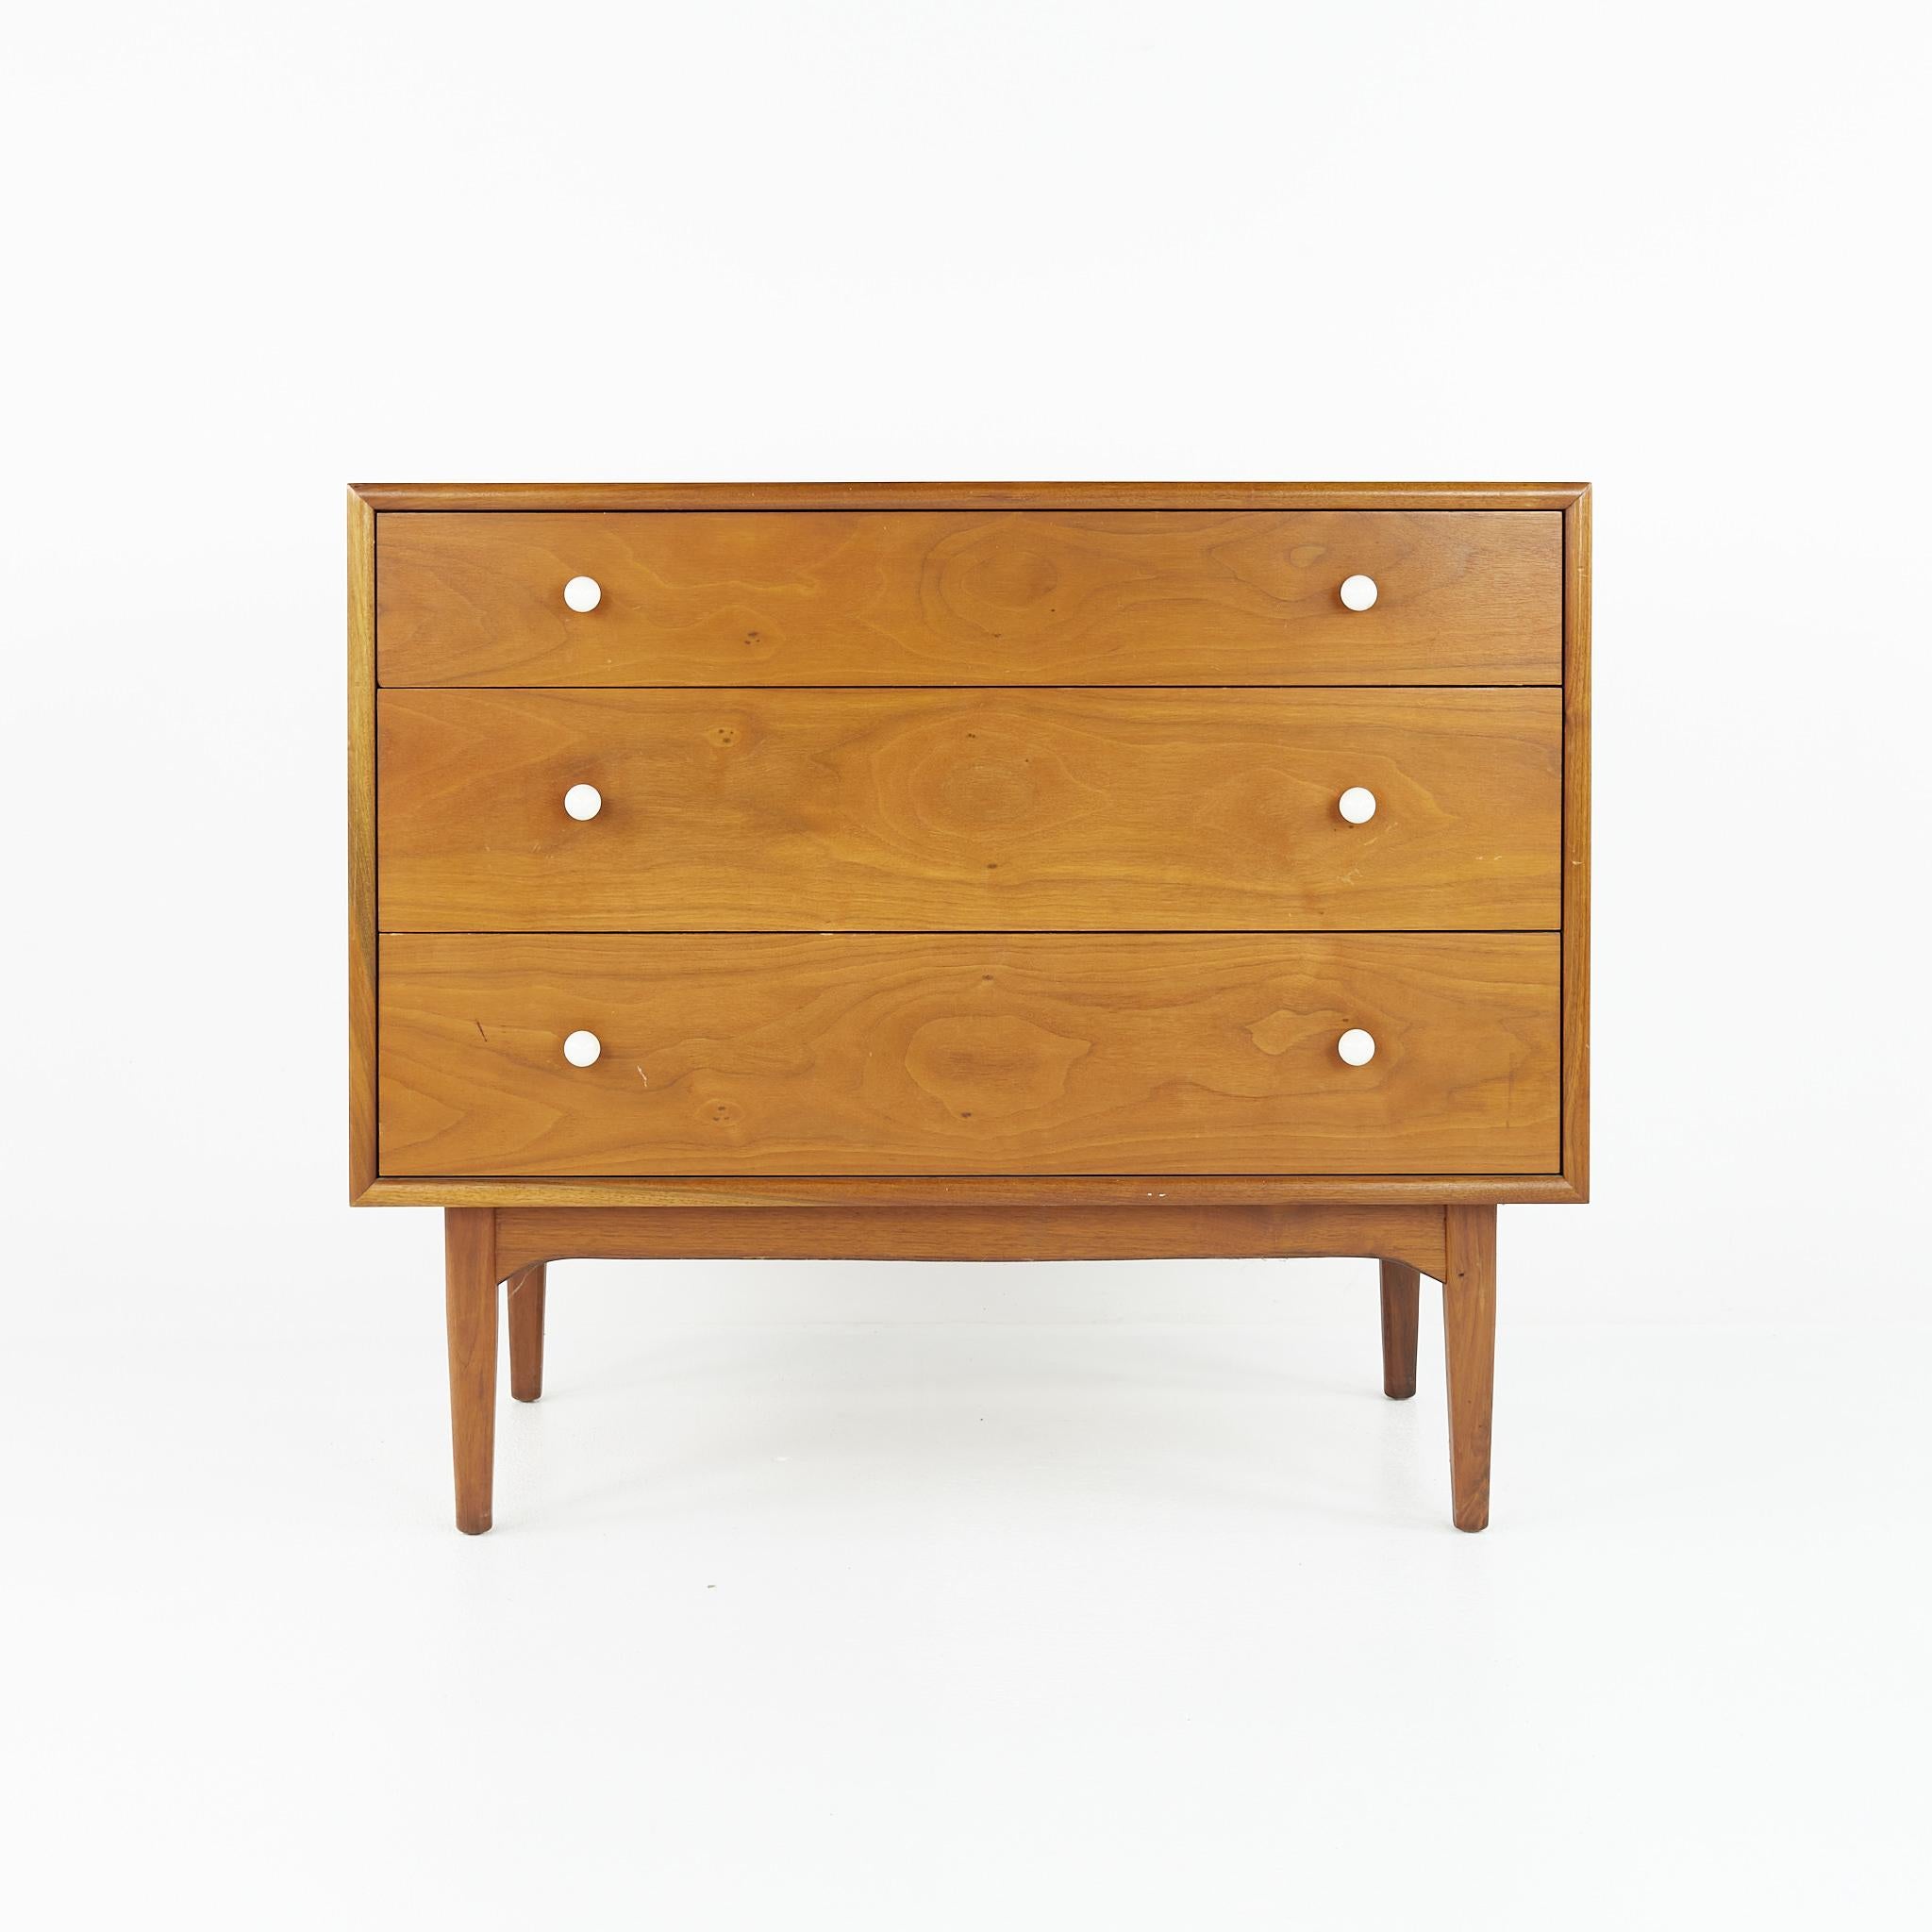 Kipp Stewart for Drexel Declaration mid century walnut 3 drawer gentleman's chest

This chest measures: 36 wide x 19.5 deep x 31.5 inches high

All pieces of furniture can be had in what we call restored vintage condition. That means the piece